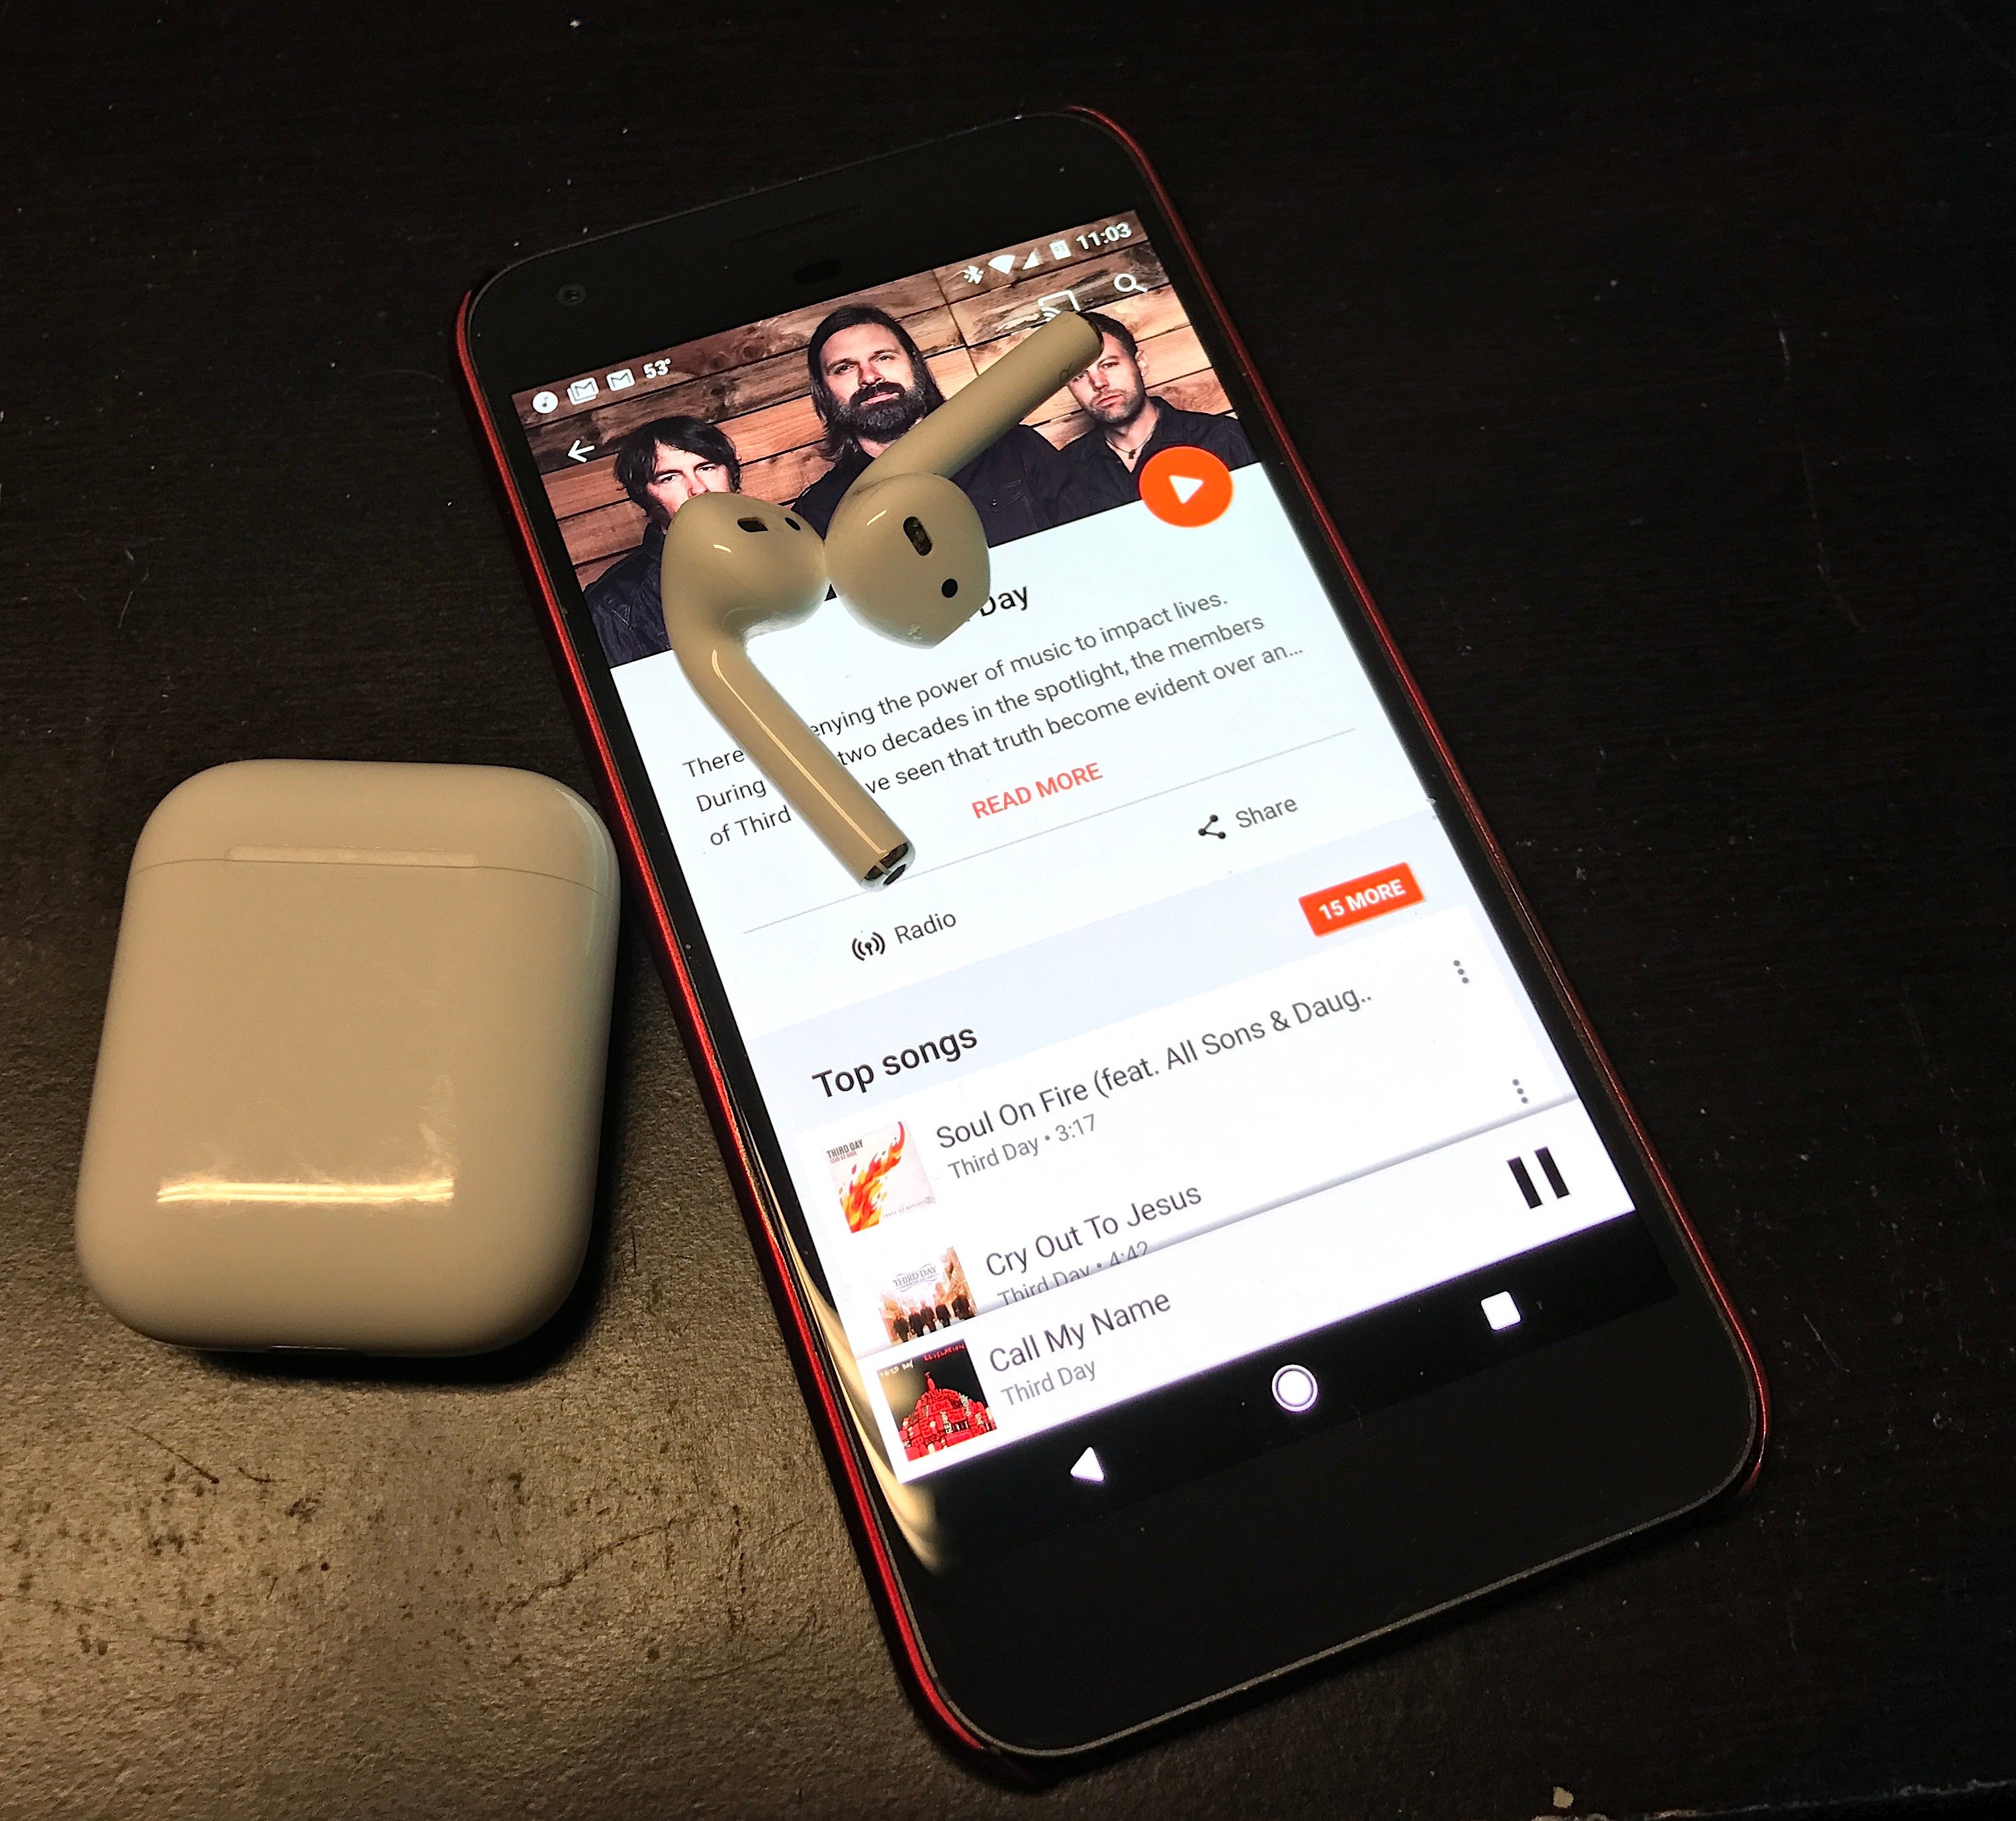 How to AirPods to Android Devices